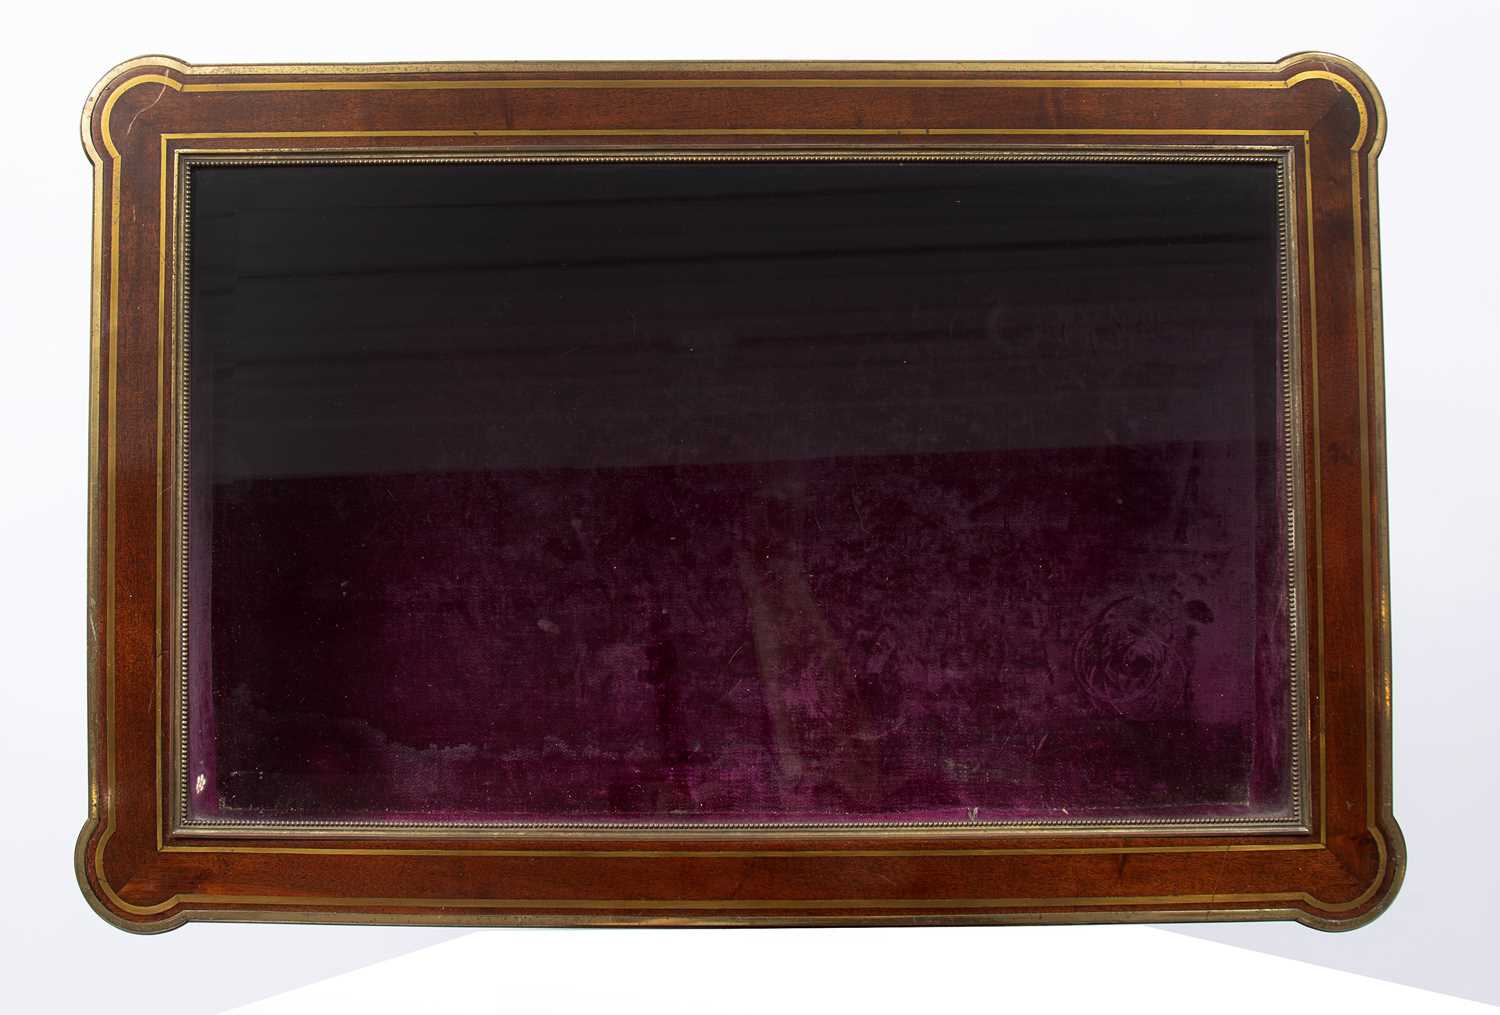 A 19th century french rosewood bijouterie table with a bevelled glass top, brass inlay and gilt - Image 6 of 6